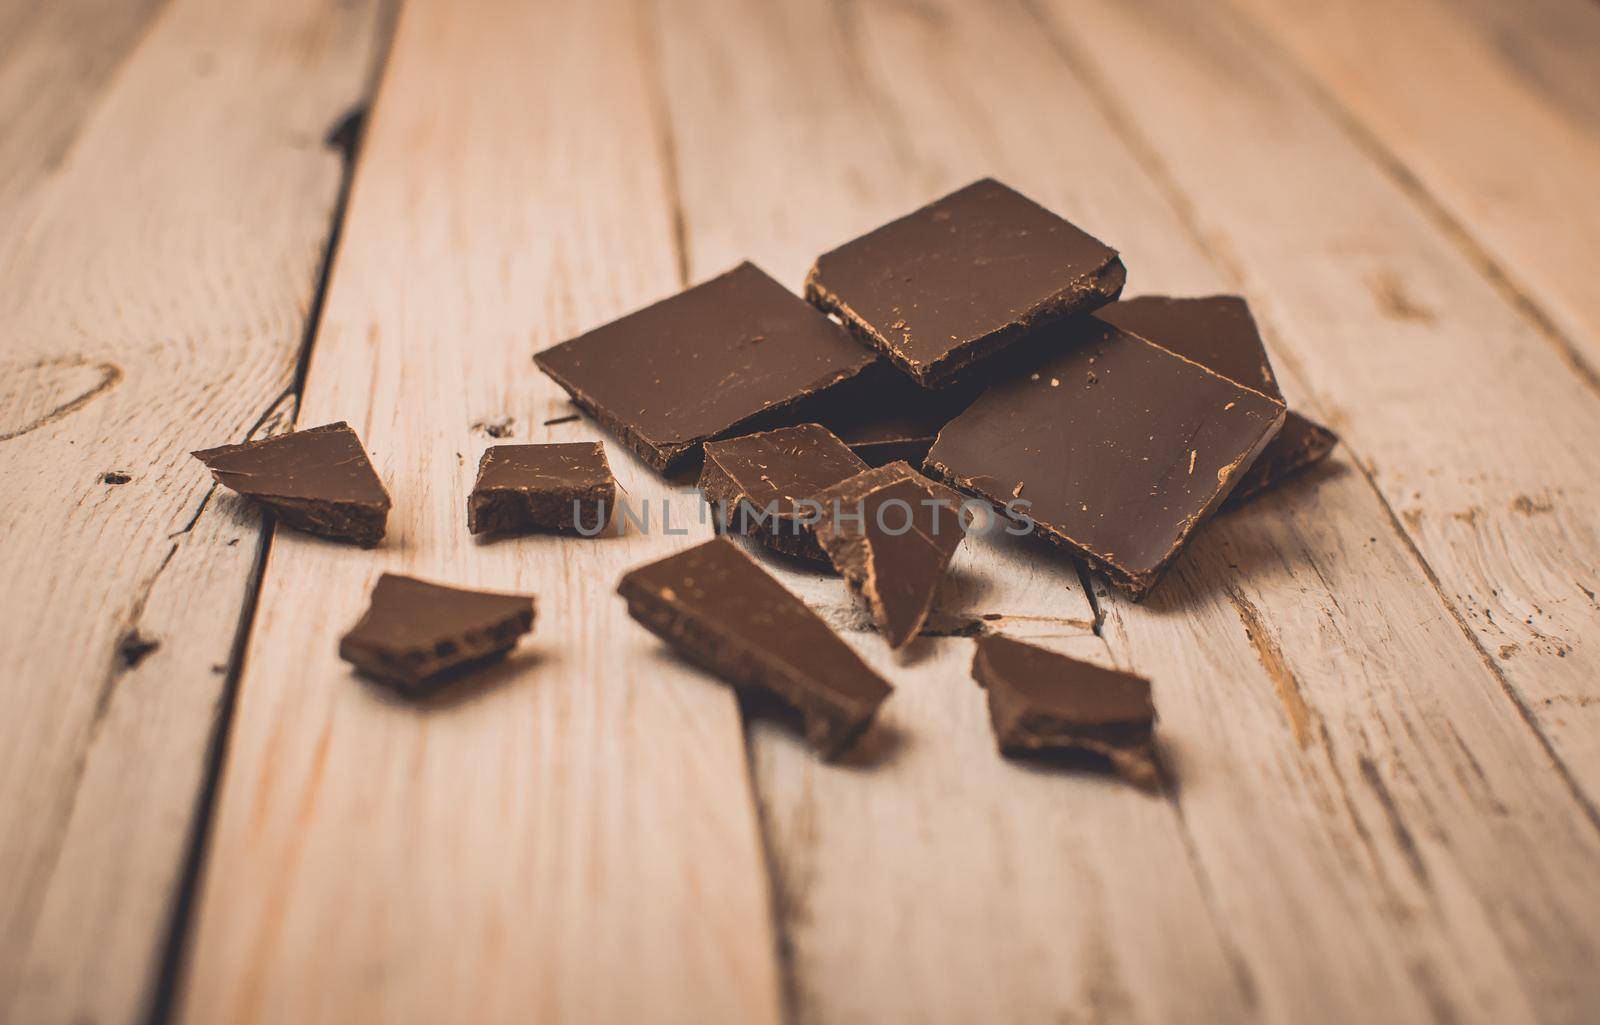 dark chocolate without sugar and gluten free for diabetics and allergics. Black chocolate broken into pieces ice on a white table in a rustic style.